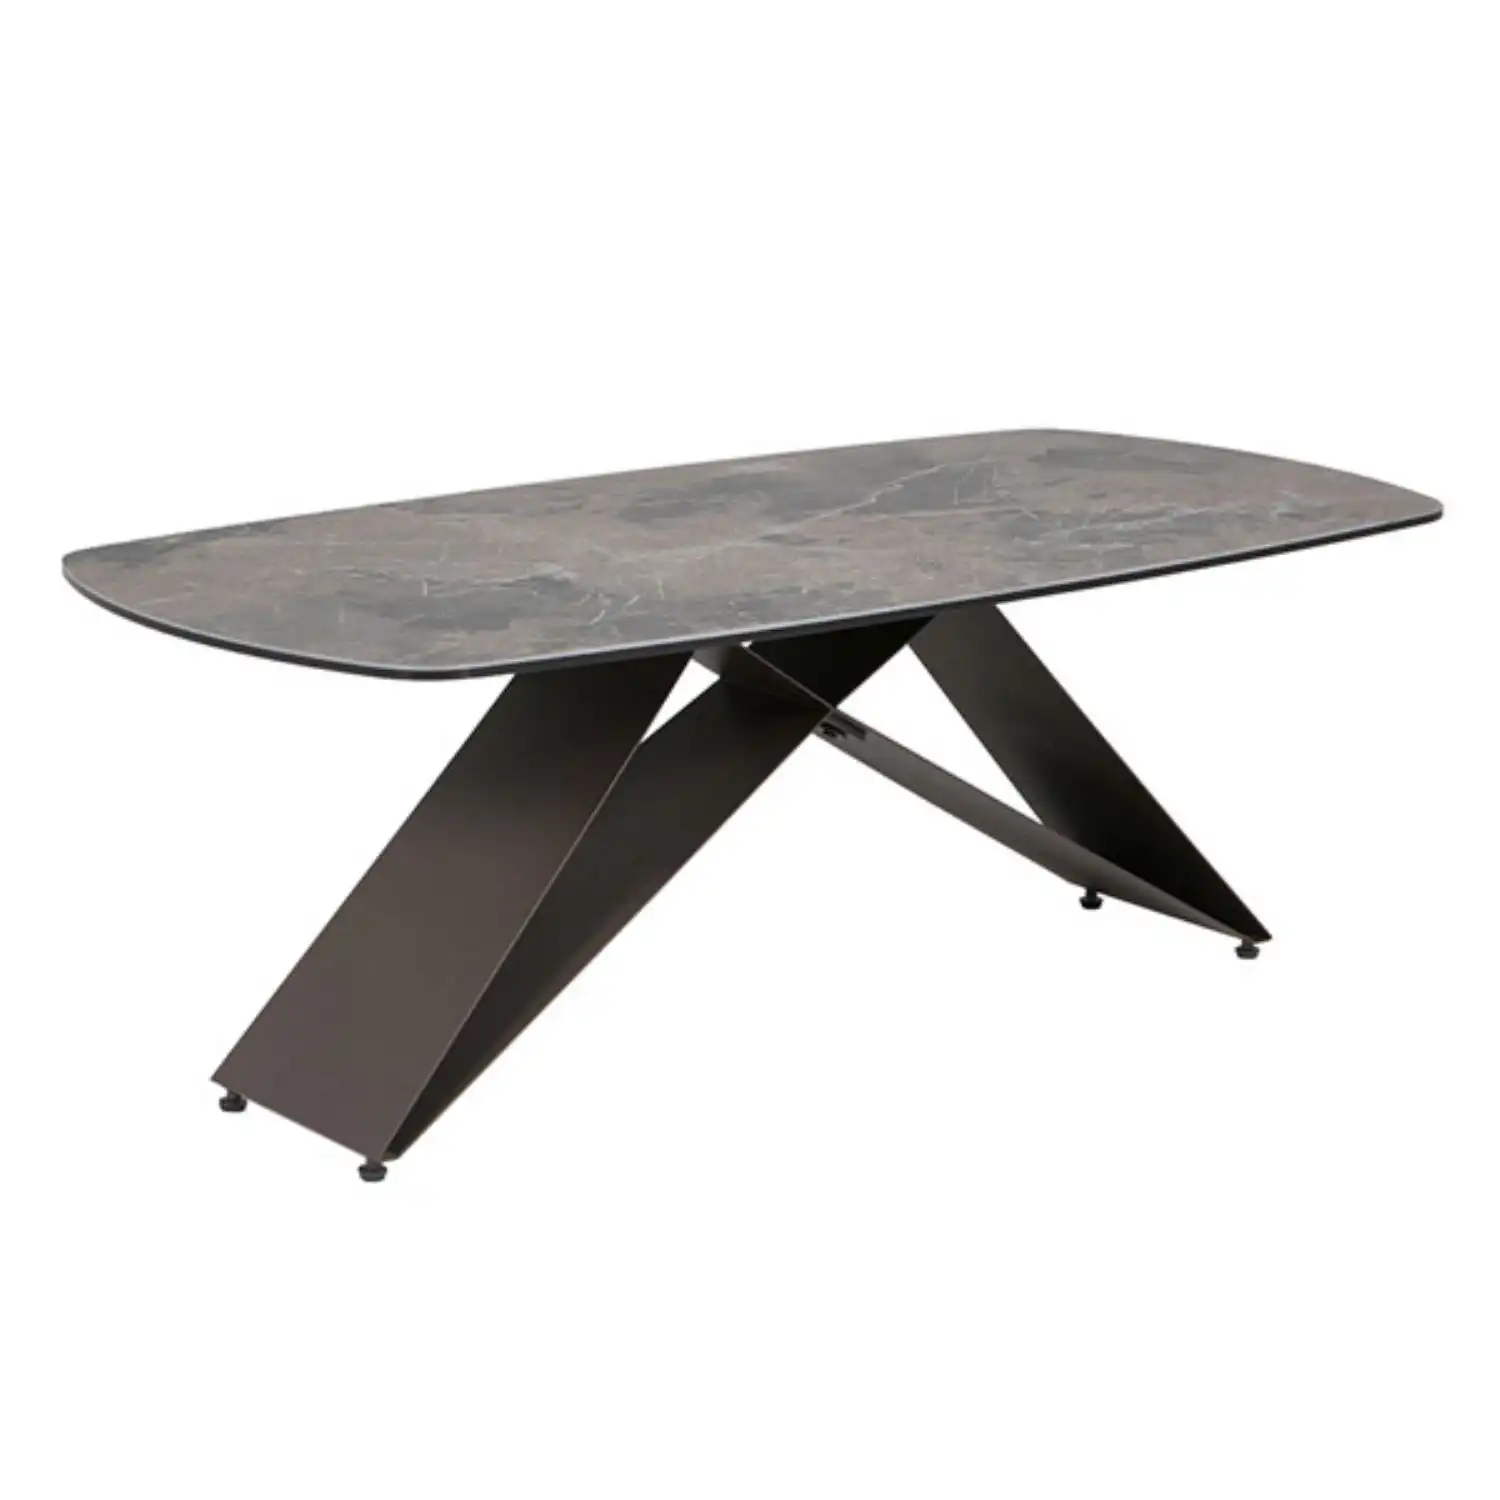 Large Espresso Ceramic Coffee Table with Cross Metal Base